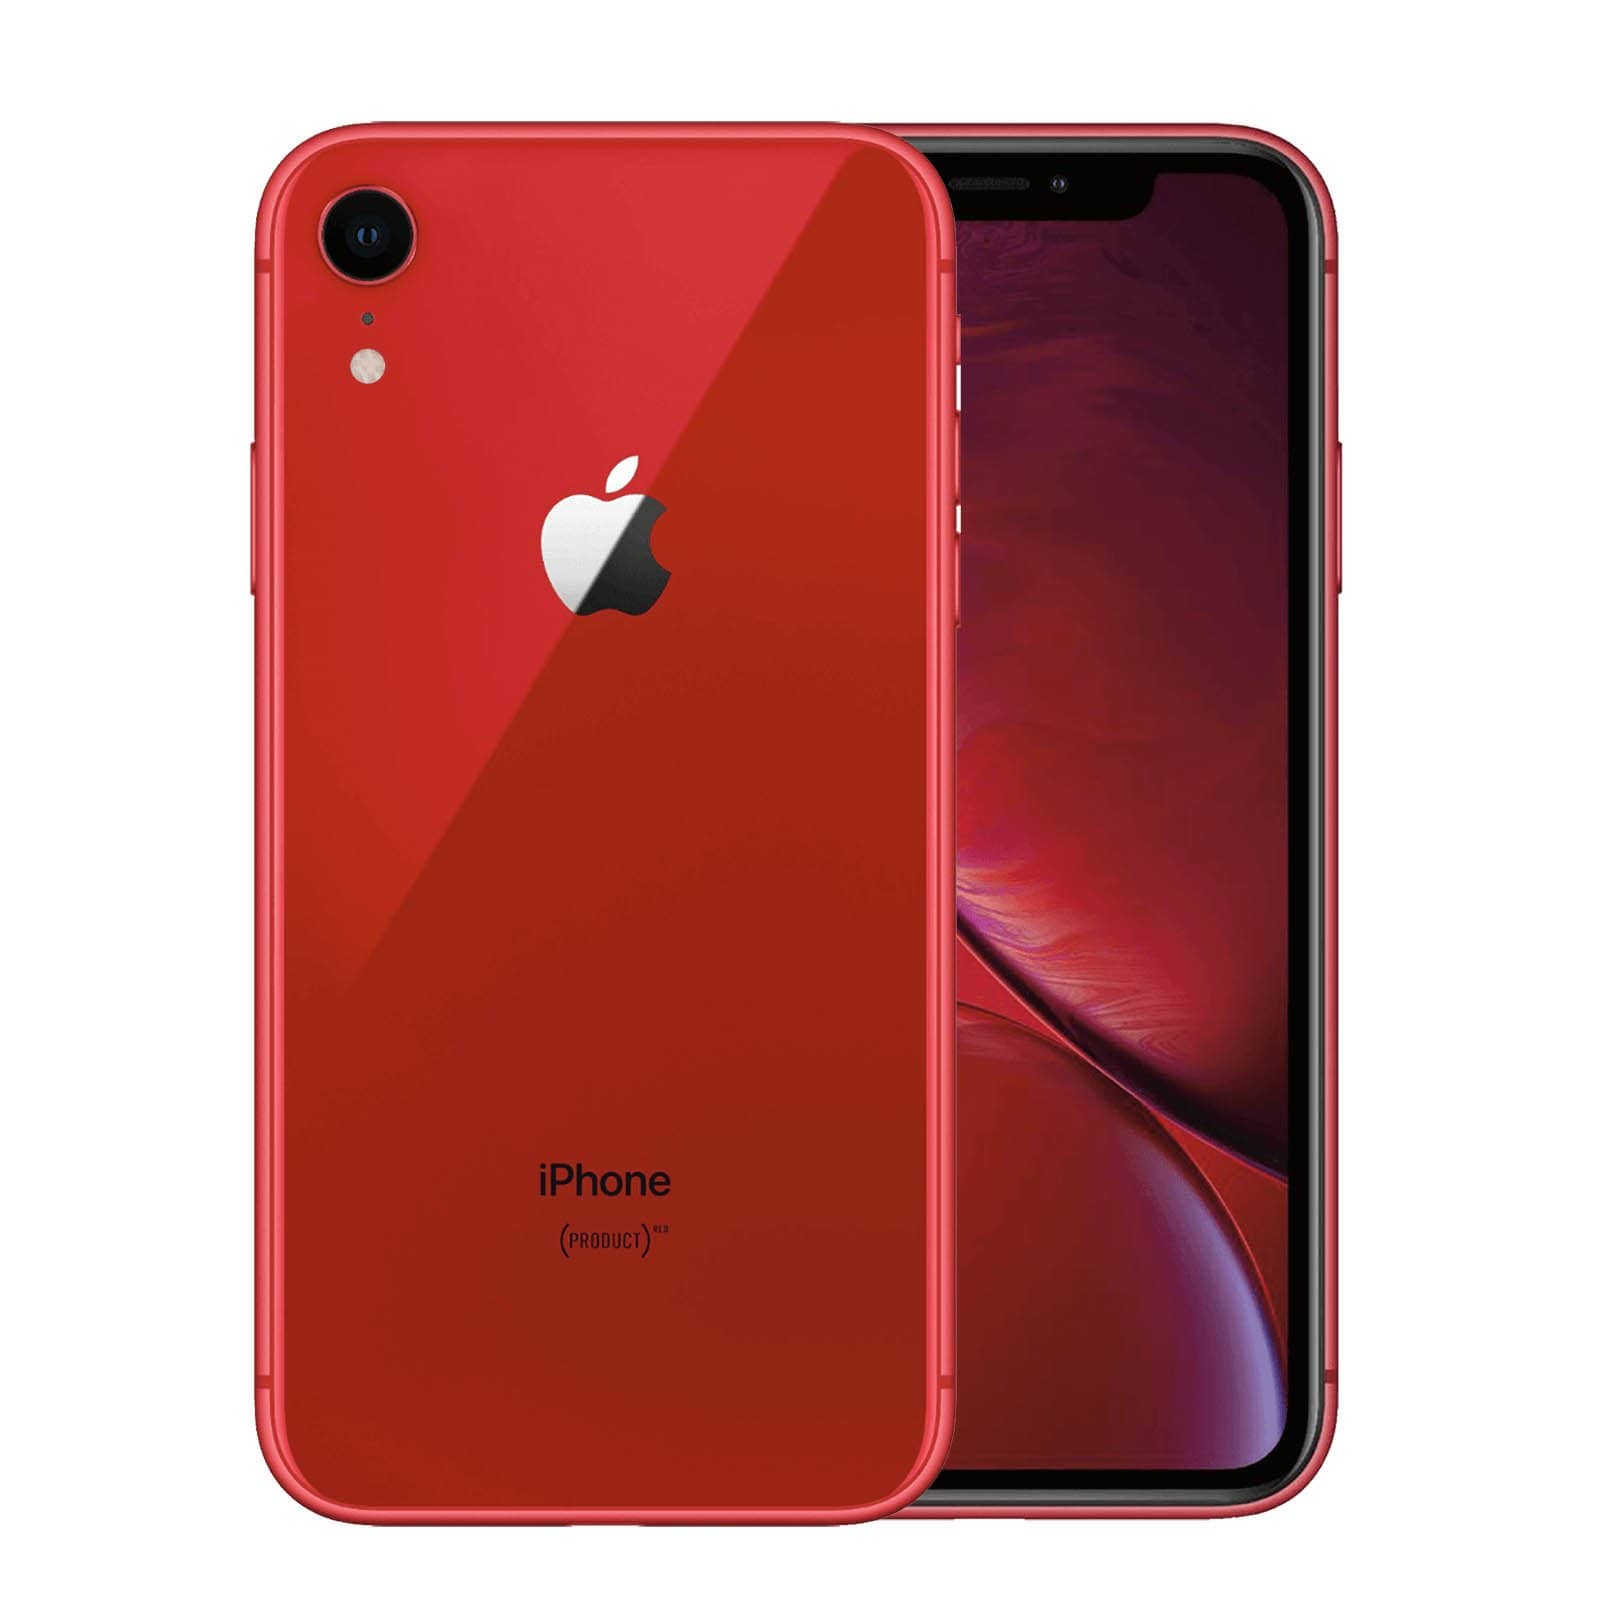 Apple iPhone XR 64GB Product Red Very Good - Unlocked 64GB Product Red Very Good